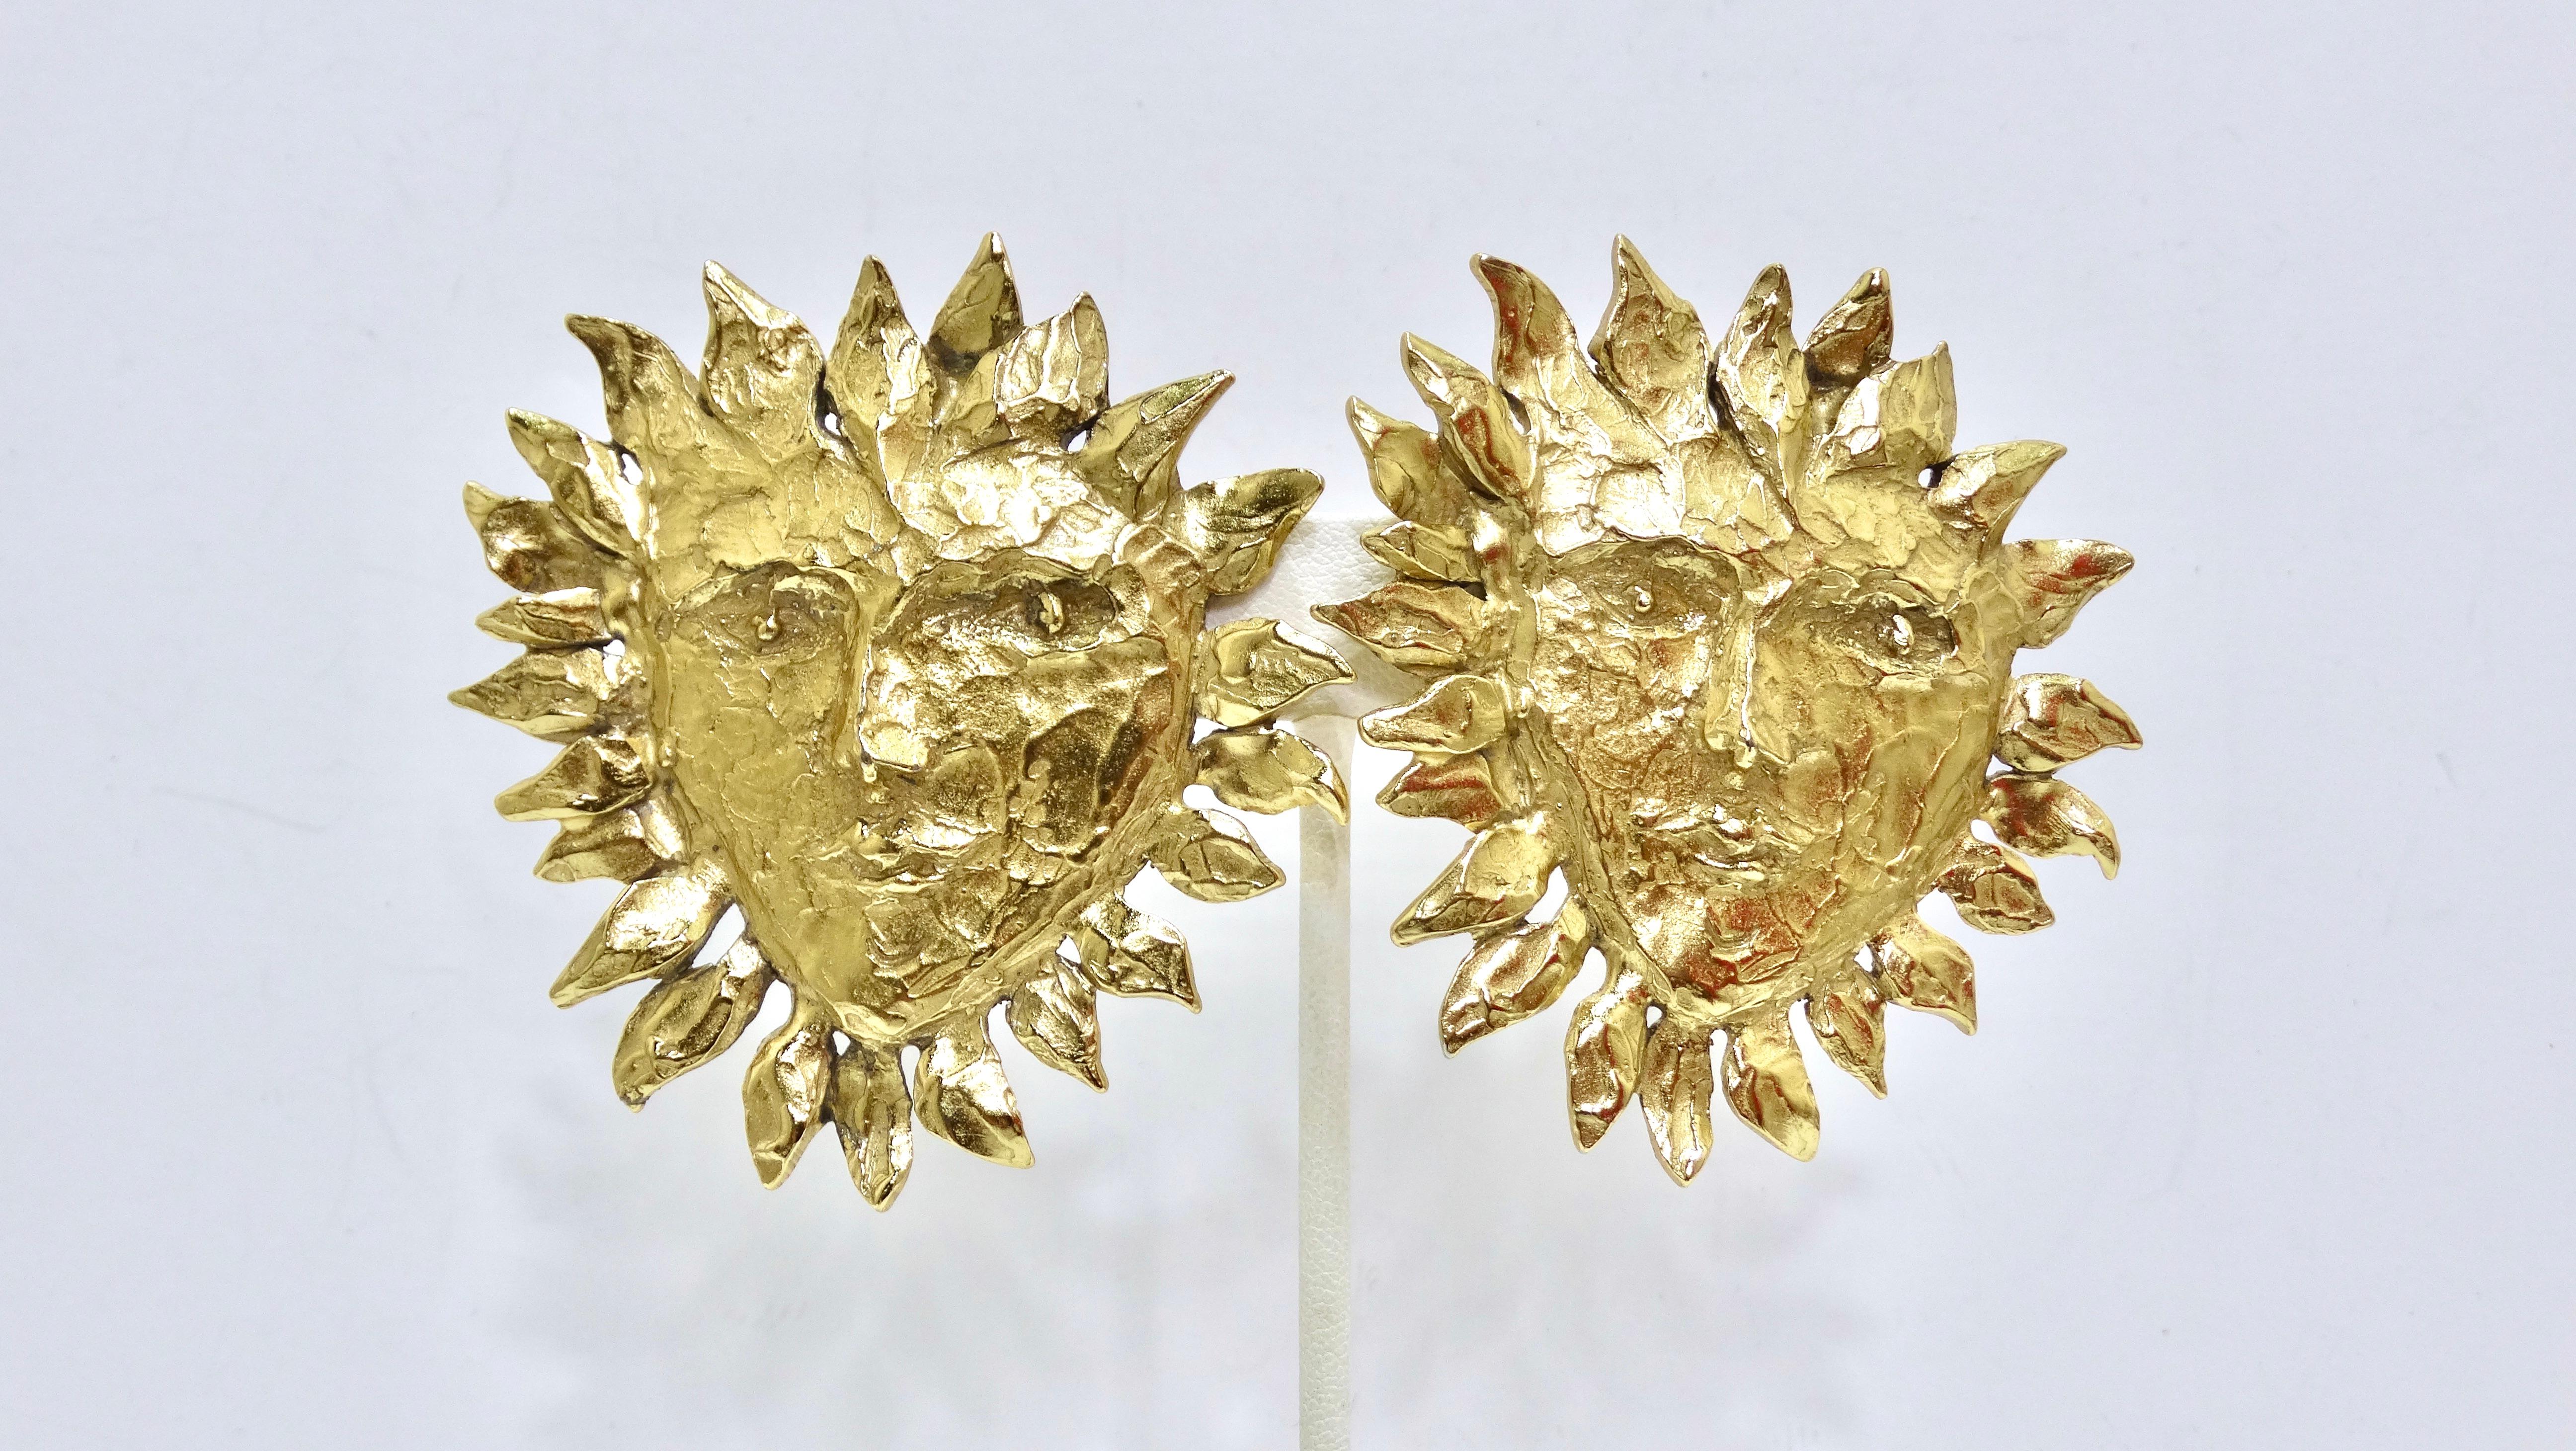 These are 1980's vintage massive Yves Saint Laurent Earrings by Robert Goossens. This rare collectors item is quite literally like wearing a piece of art as each one is unique and handmade. They feature a highly textured and gold-toned sun face